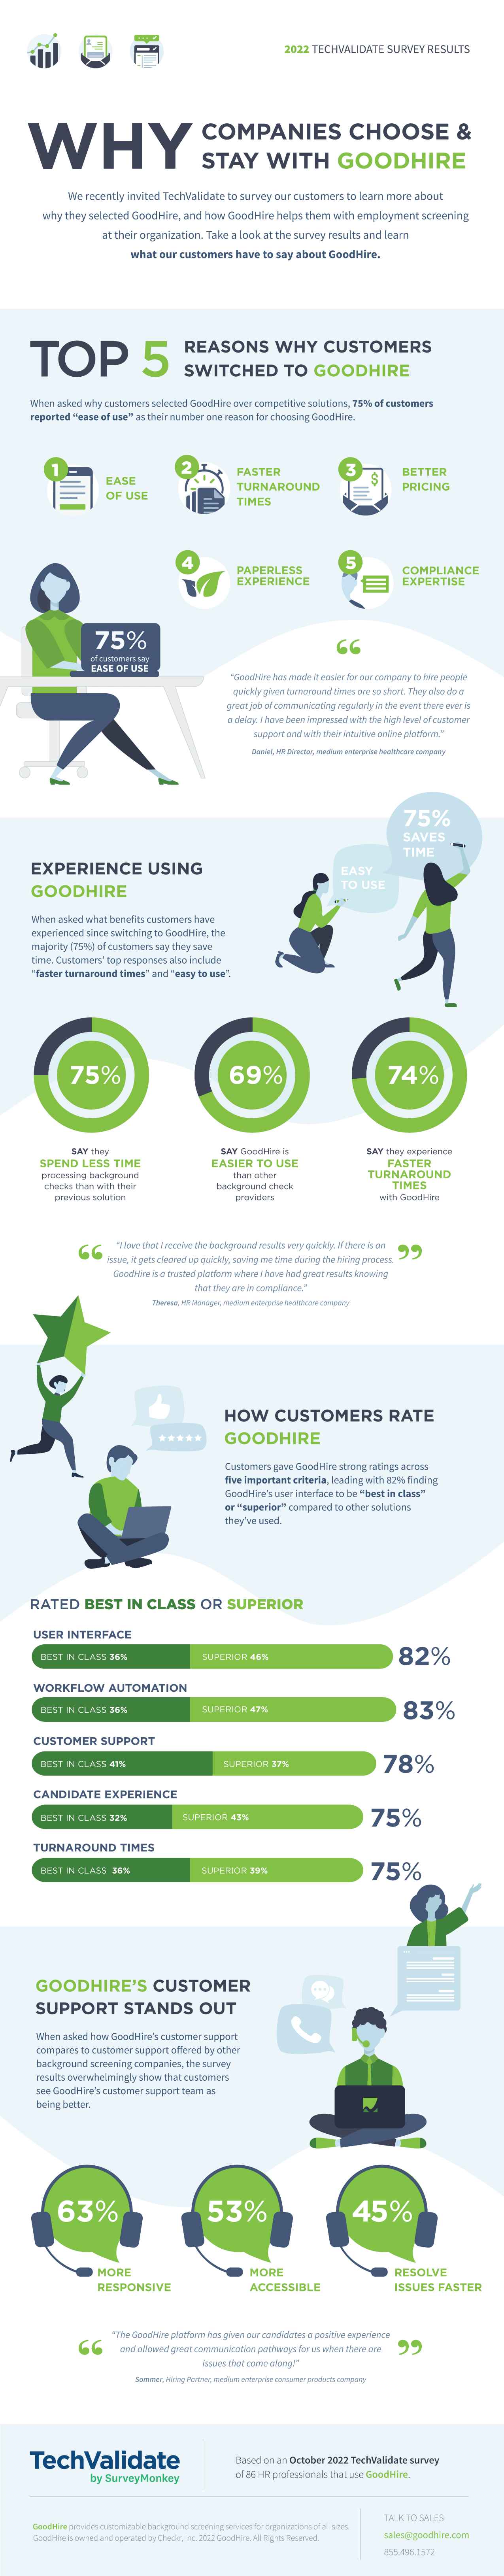 Infographic shows results from a TechValidate of GoodHire customers.